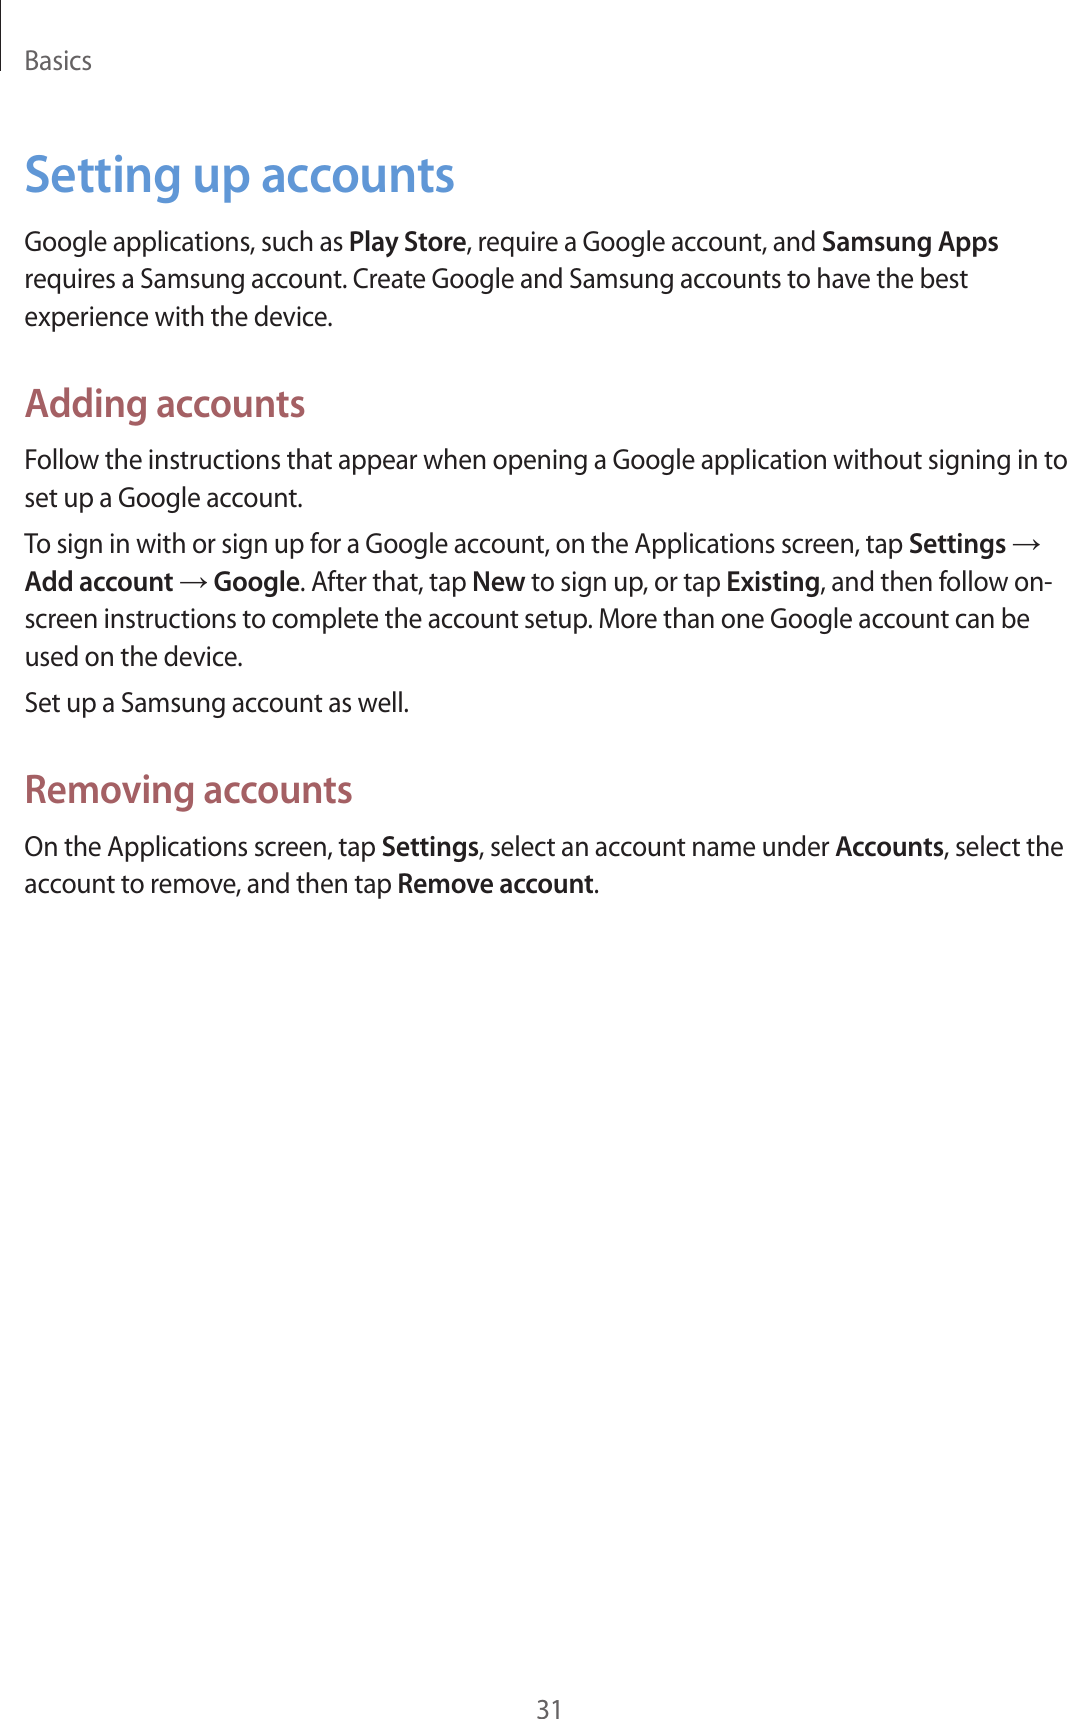 Basics31Setting up accountsGoogle applications, such as Play Store, require a Google account, and Samsung Apps requires a Samsung account. Create Google and Samsung accounts to have the best experience with the device.Adding accountsFollow the instructions that appear when opening a Google application without signing in to set up a Google account.To sign in with or sign up for a Google account, on the Applications screen, tap Settings → Add account → Google. After that, tap New to sign up, or tap Existing, and then follow on-screen instructions to complete the account setup. More than one Google account can be used on the device.Set up a Samsung account as well.Removing accountsOn the Applications screen, tap Settings, select an account name under Accounts, select the account to remove, and then tap Remove account.